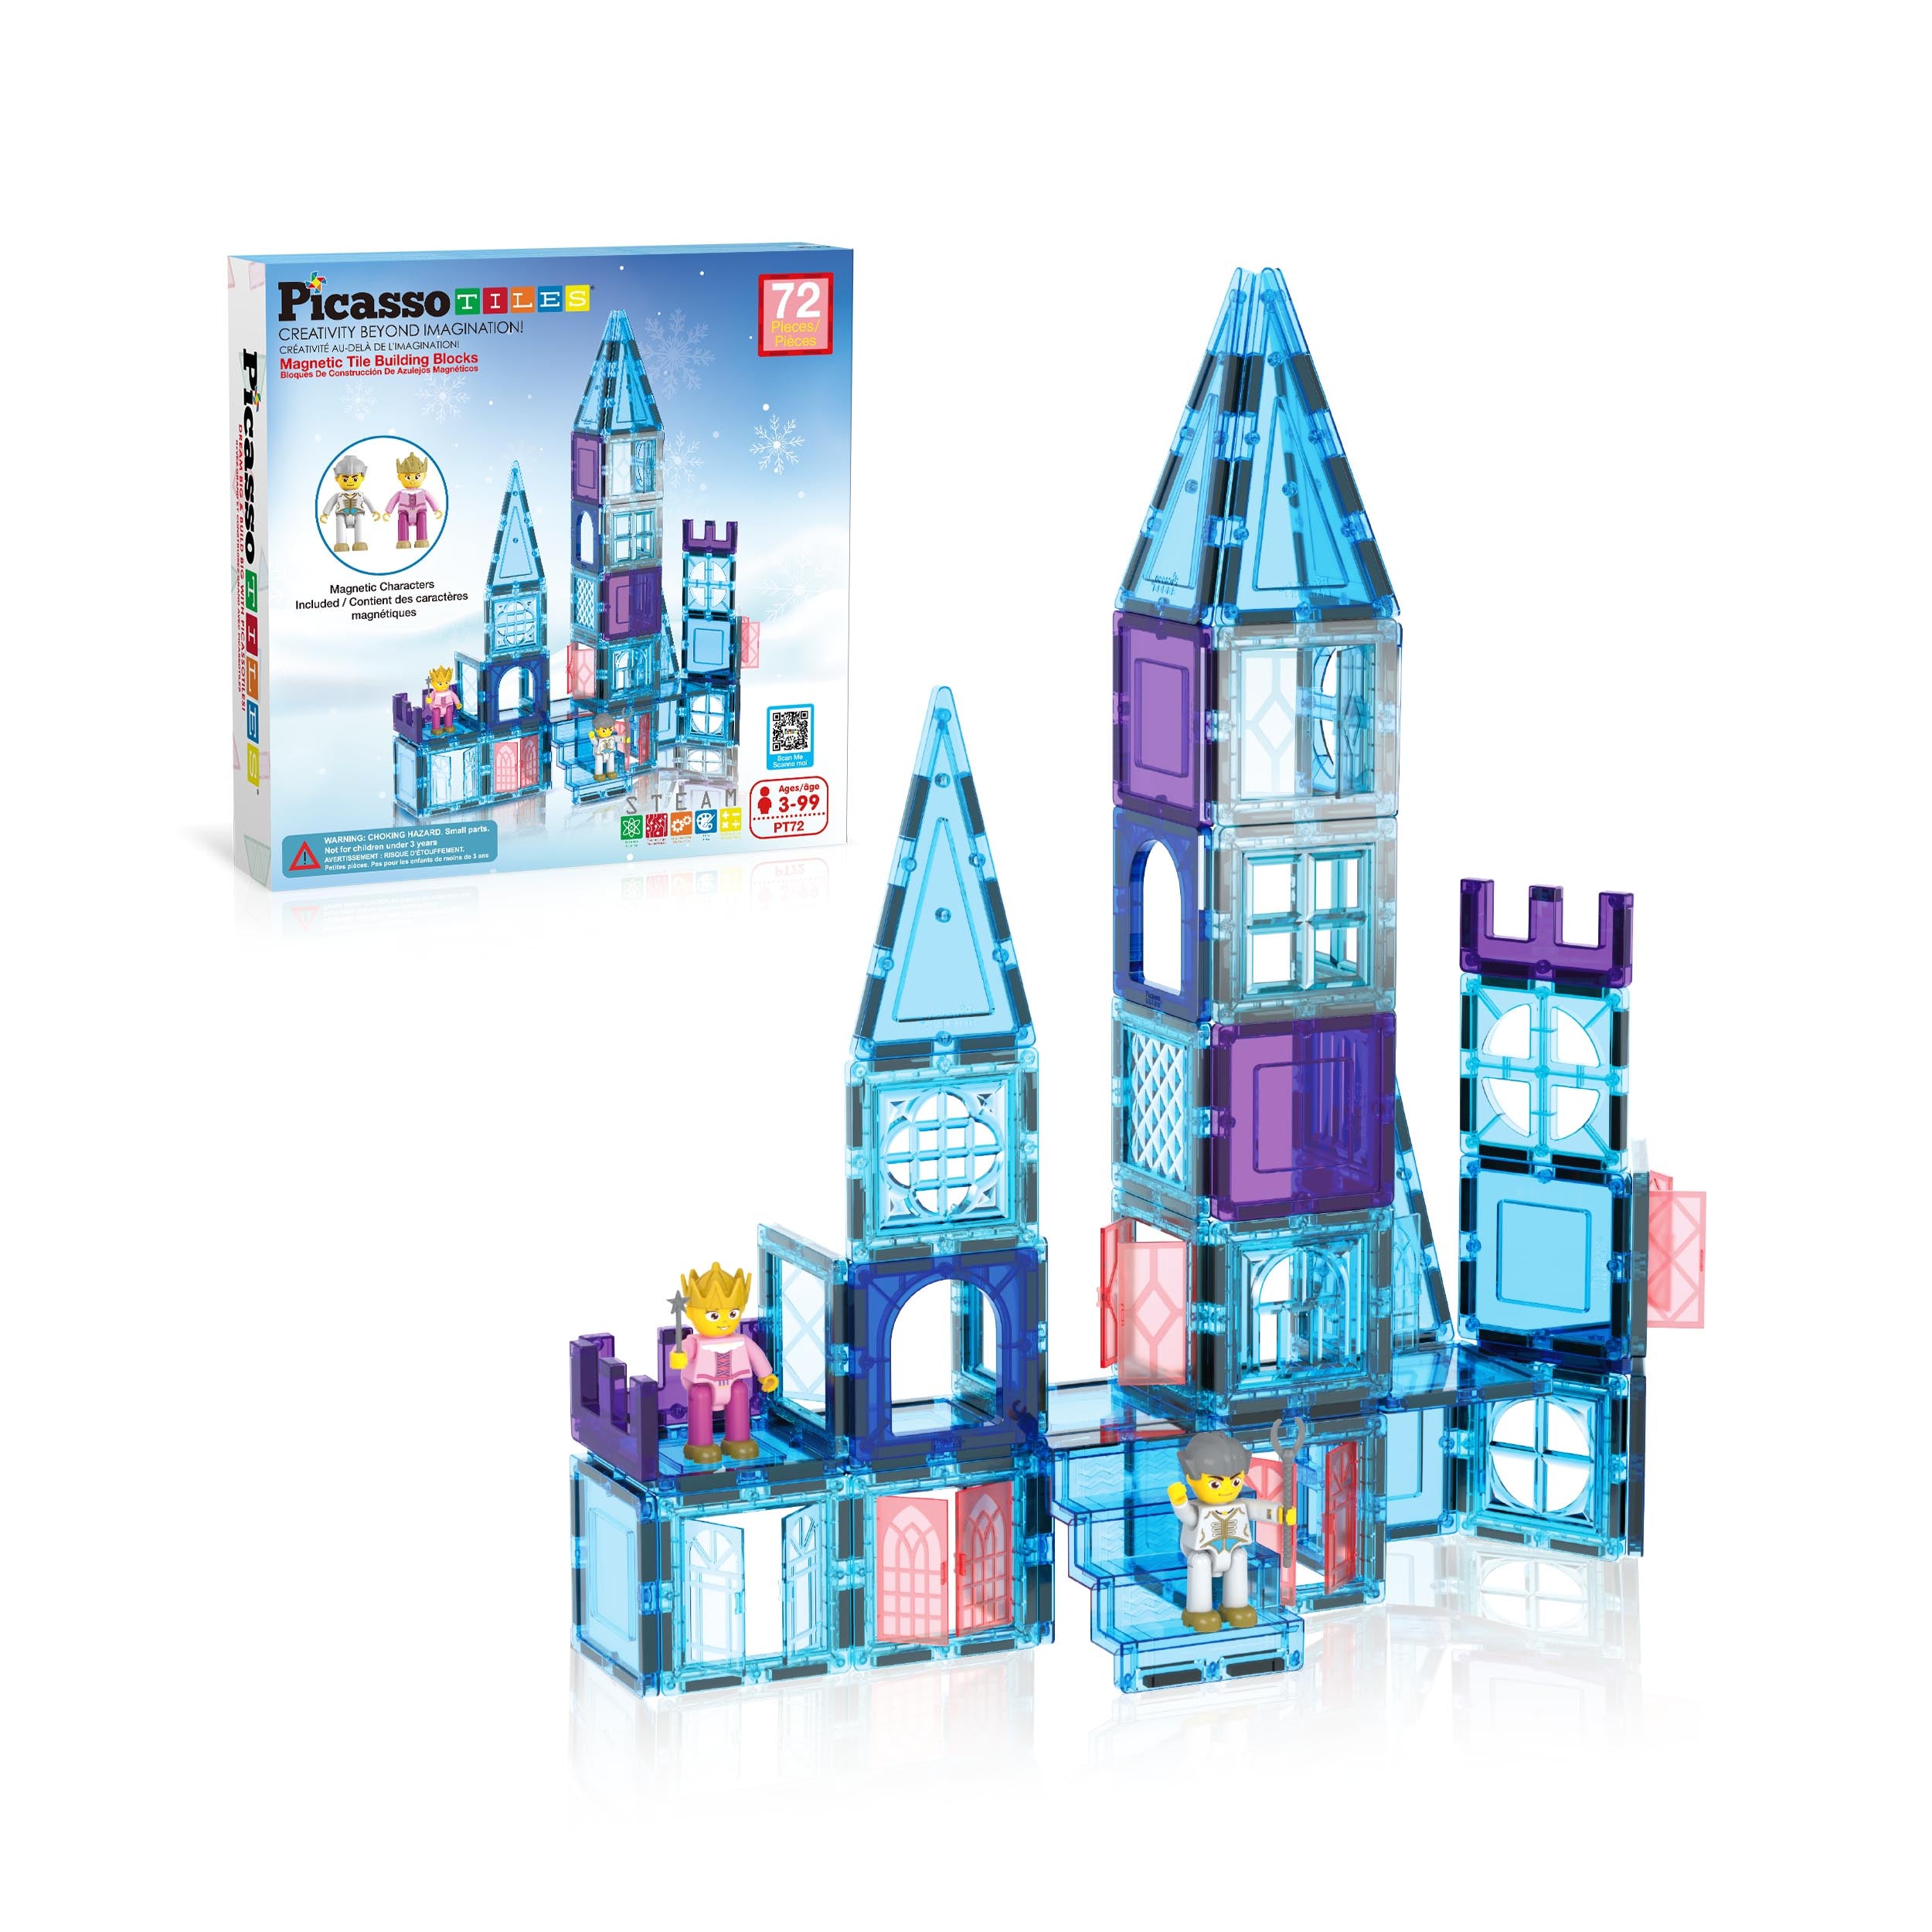 PicassoTiles 72pc Ice Castle Magnet Building Tiles with Characters